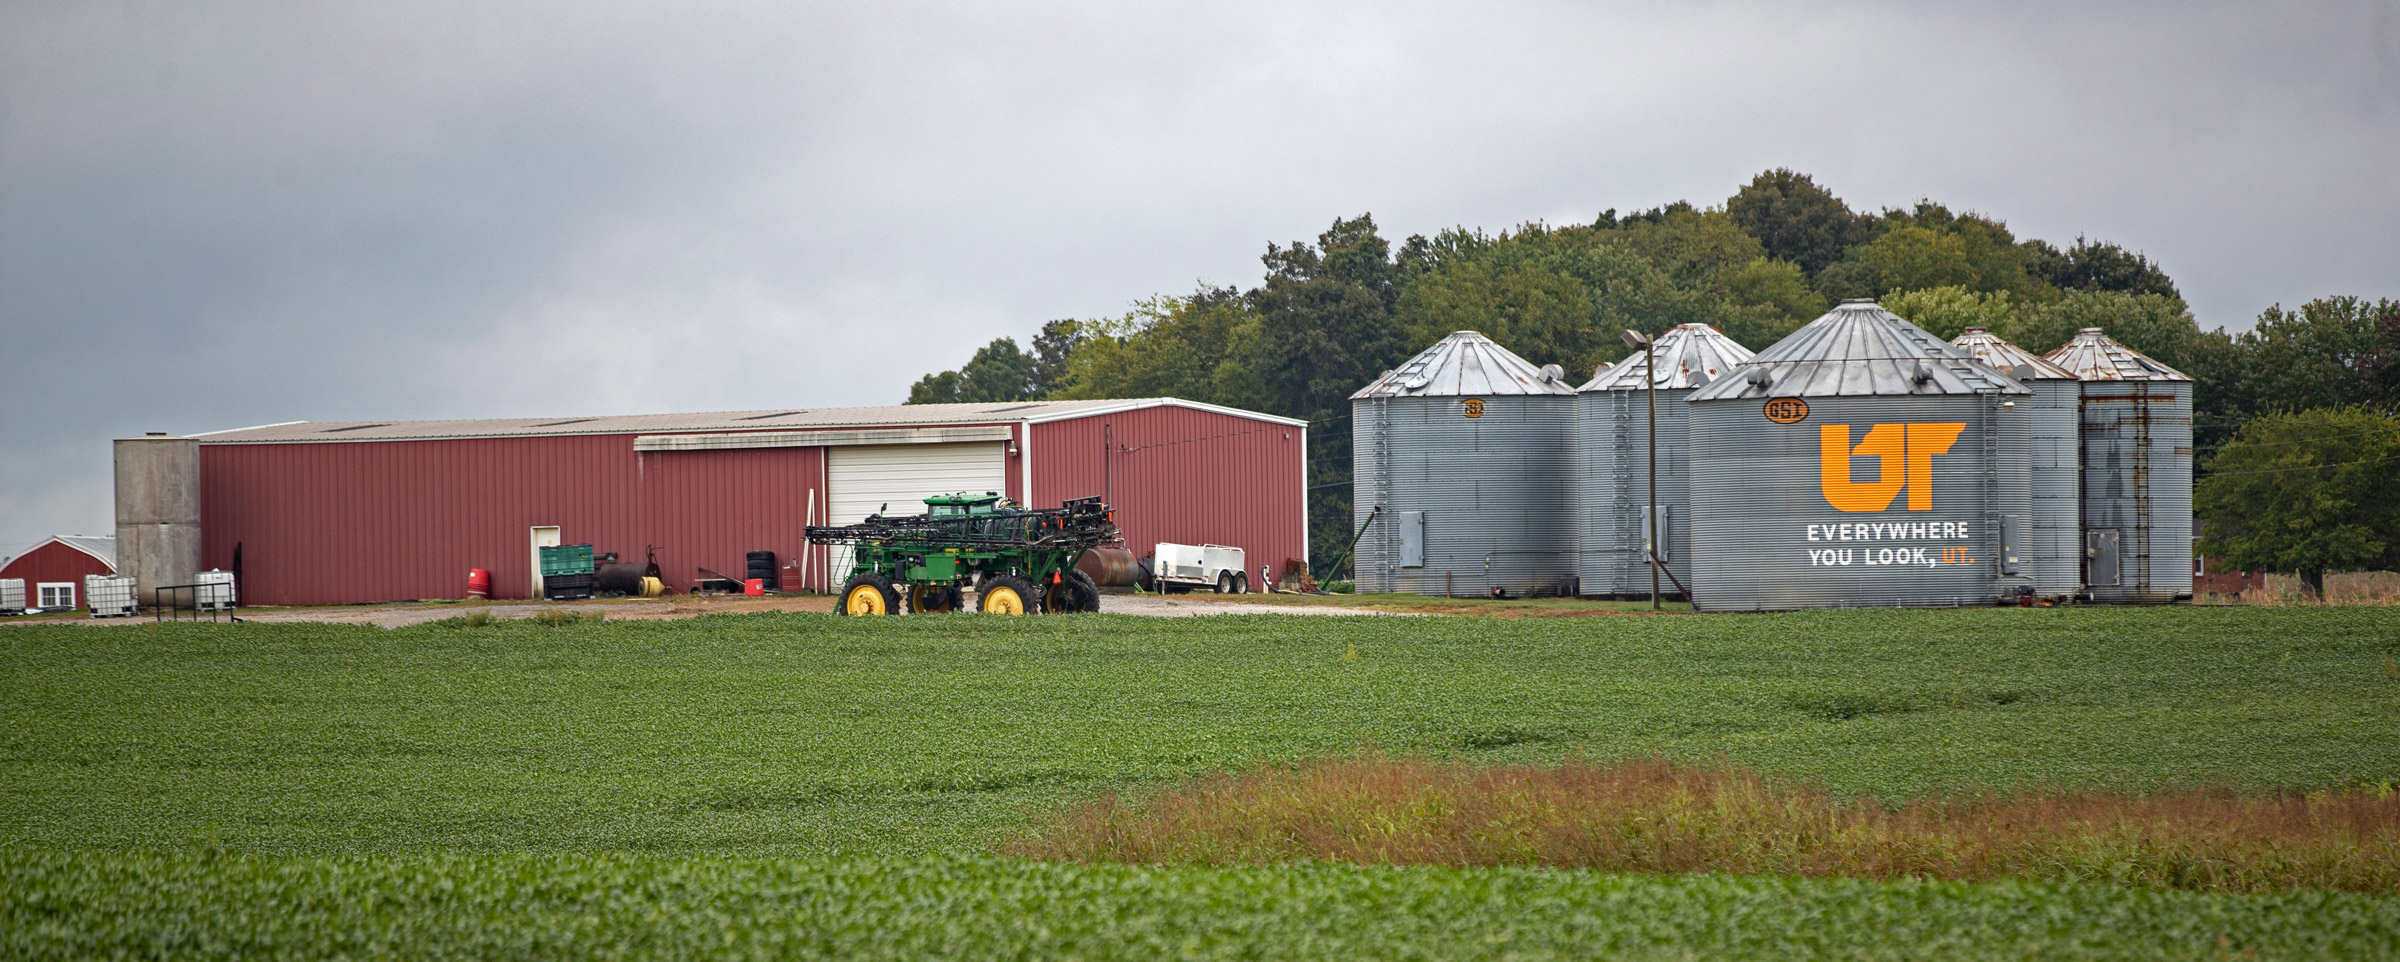 A red barn and a group of grain silos in a green agricultural field. One one of the silos has a large UT icon painted on it